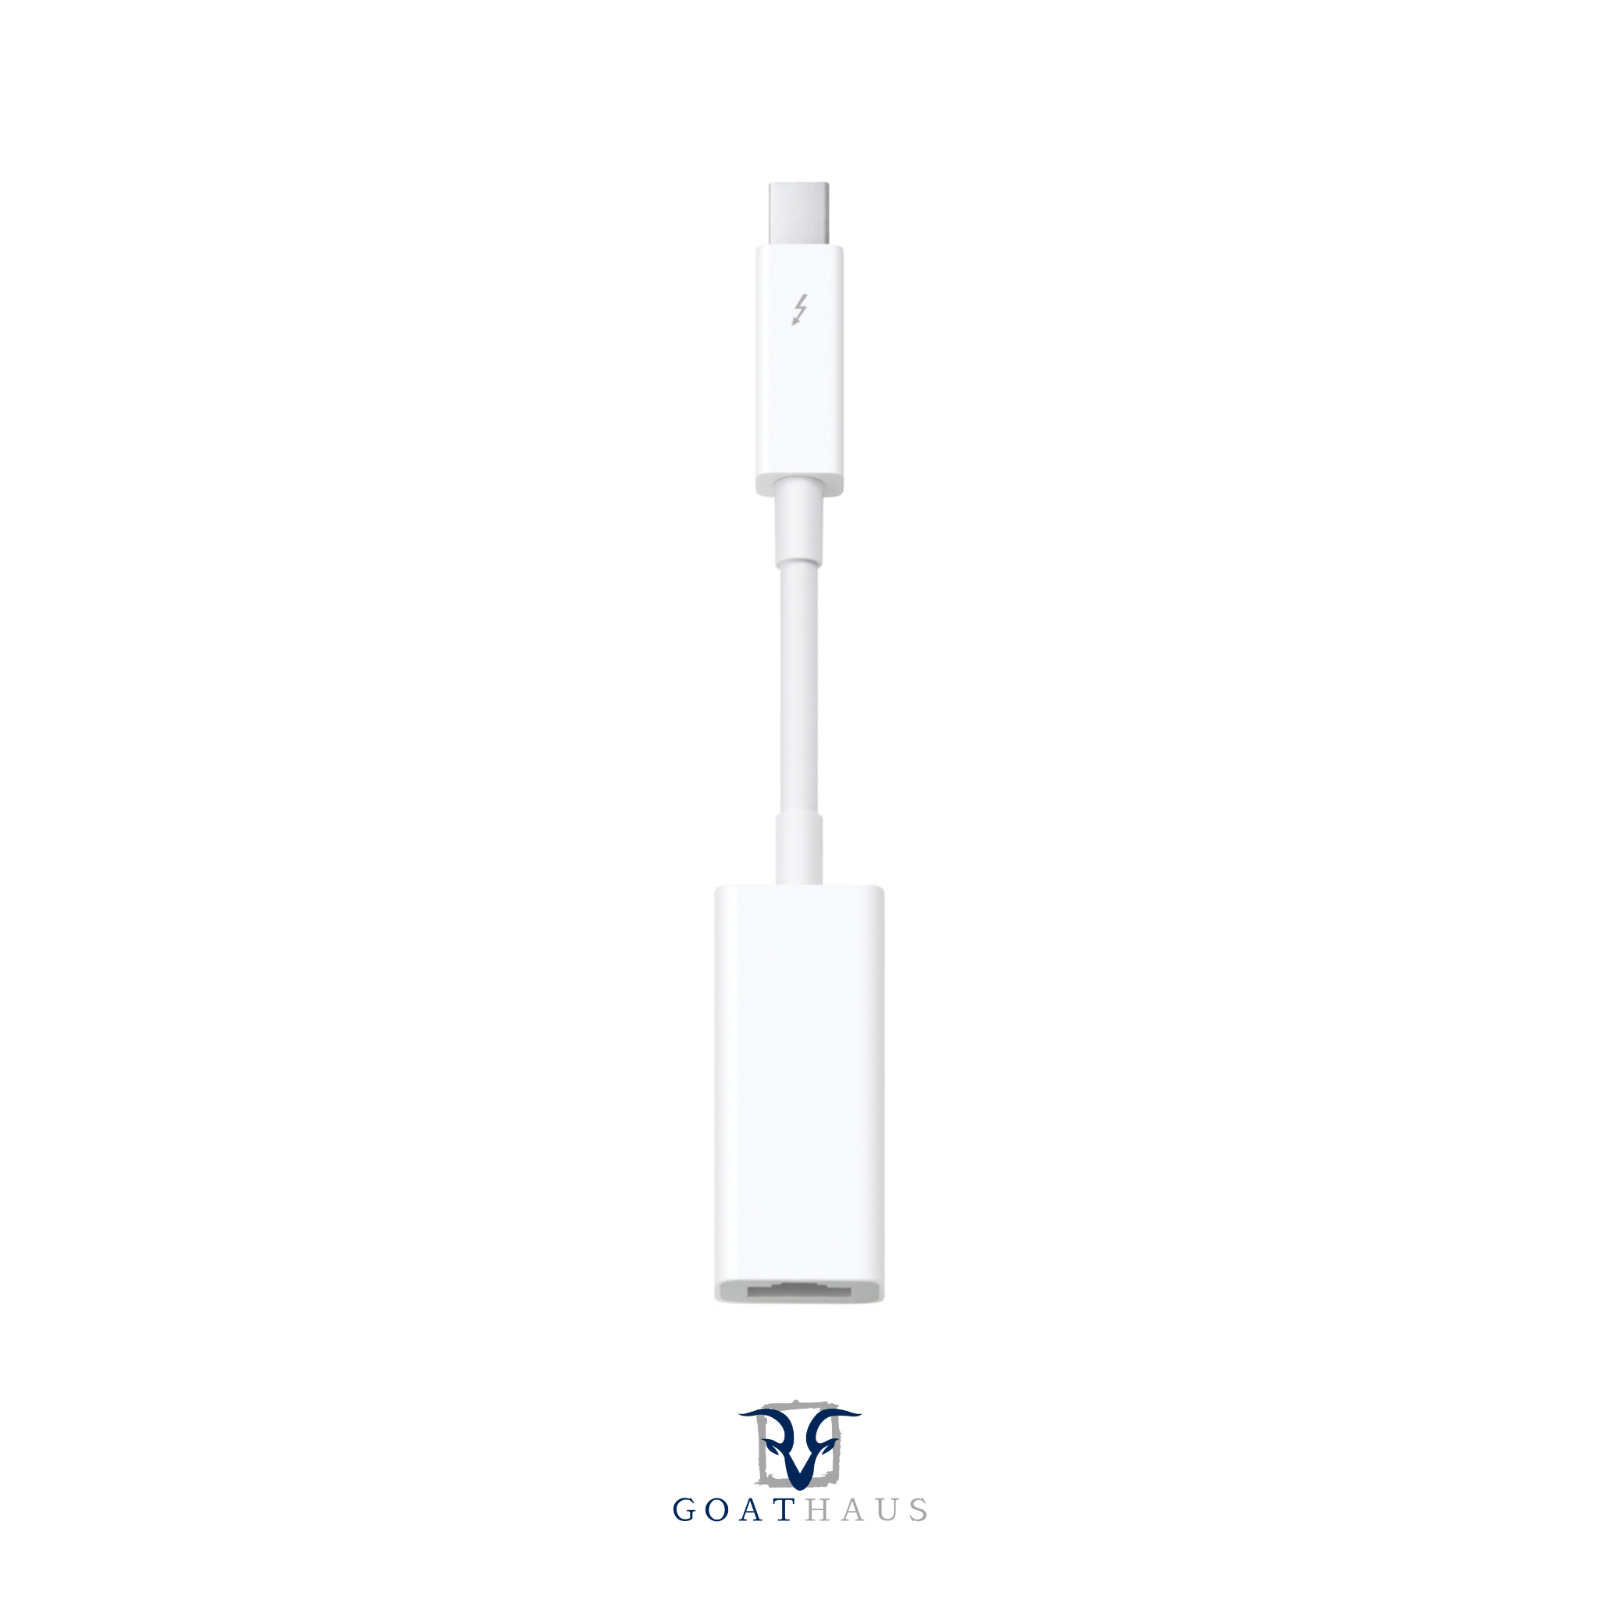 Apple Thunderbolt to Gigabit Ethernet Adapter -  A1433  MD463LL/A